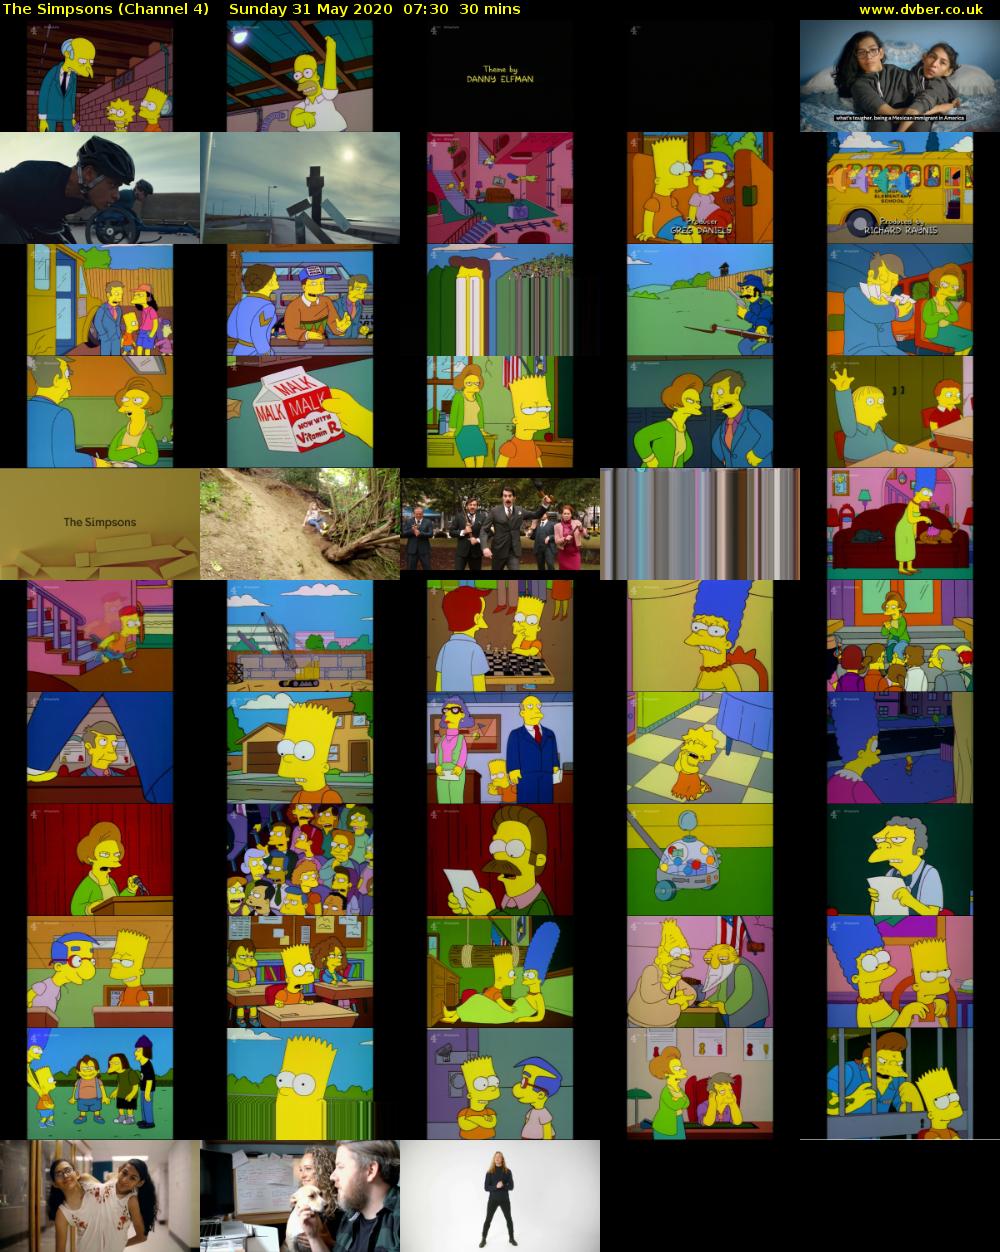 The Simpsons (Channel 4) Sunday 31 May 2020 07:30 - 08:00